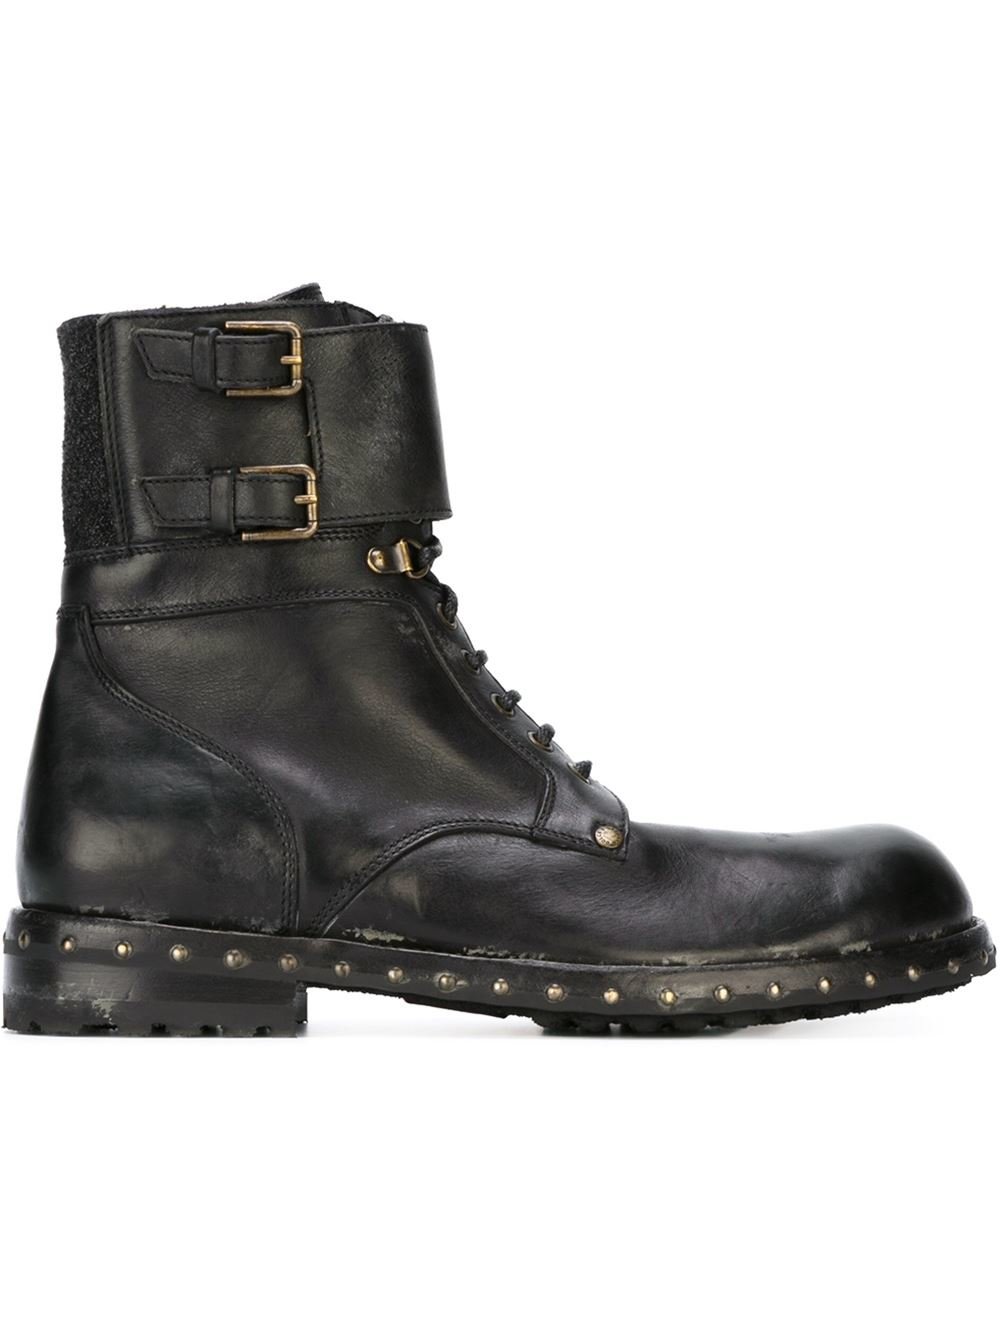 Lyst - Dolce & Gabbana Ankle Strap Utility Boots in Black for Men